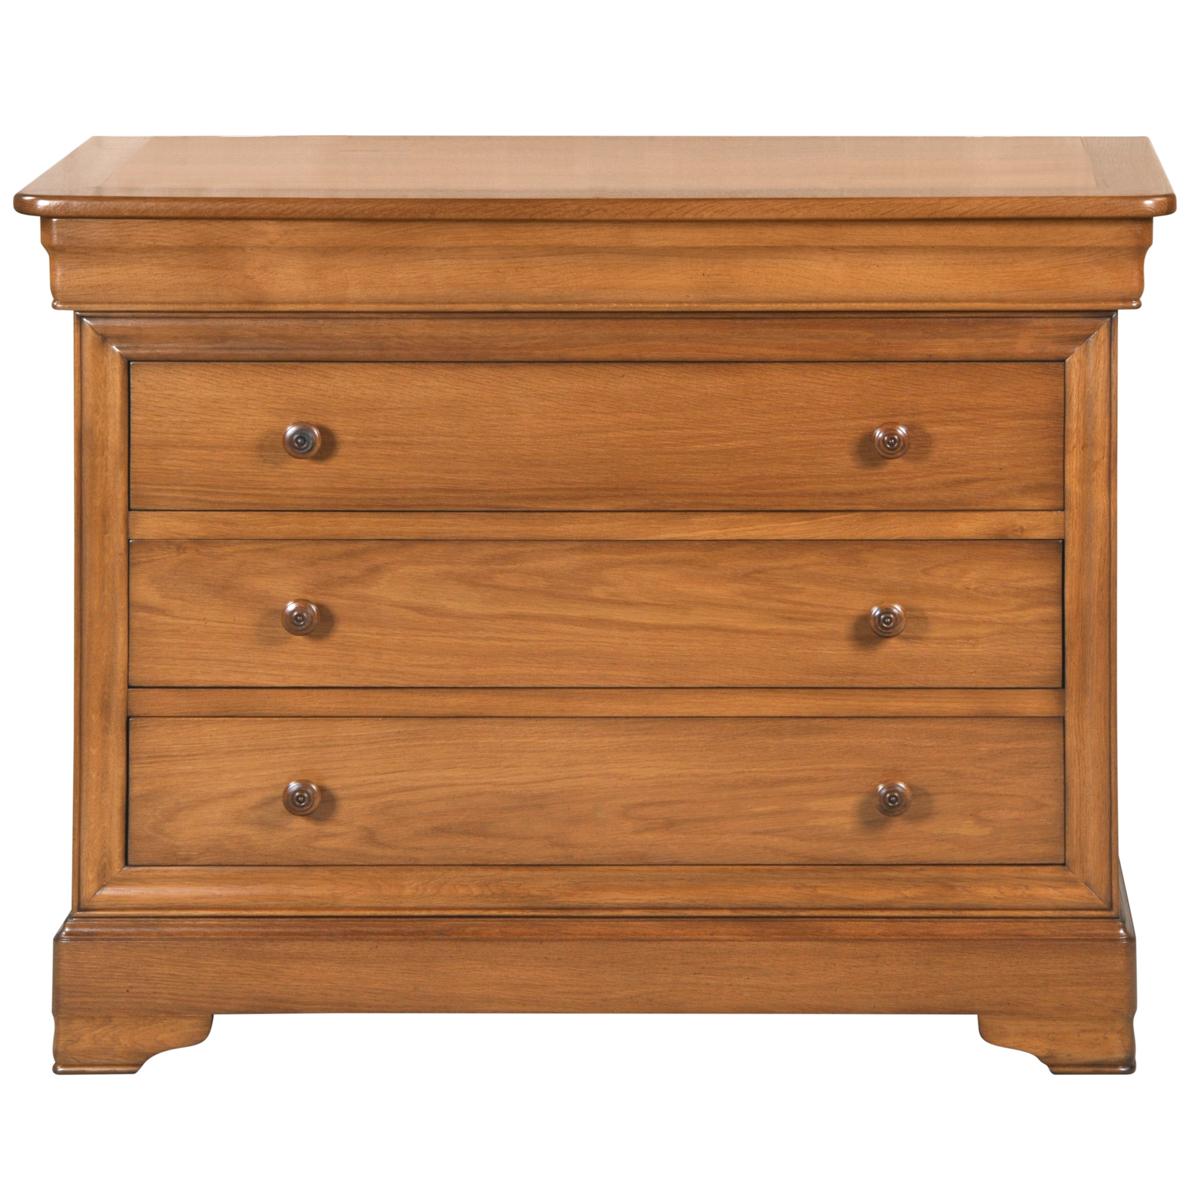 This chest of drawers is a handmade reproduction of the French Louis Philippe Style in the mid 19th century in France caracterized by its curved moldings, hand-curved feet and rounded design.

This French Commode features 4 large drawers including